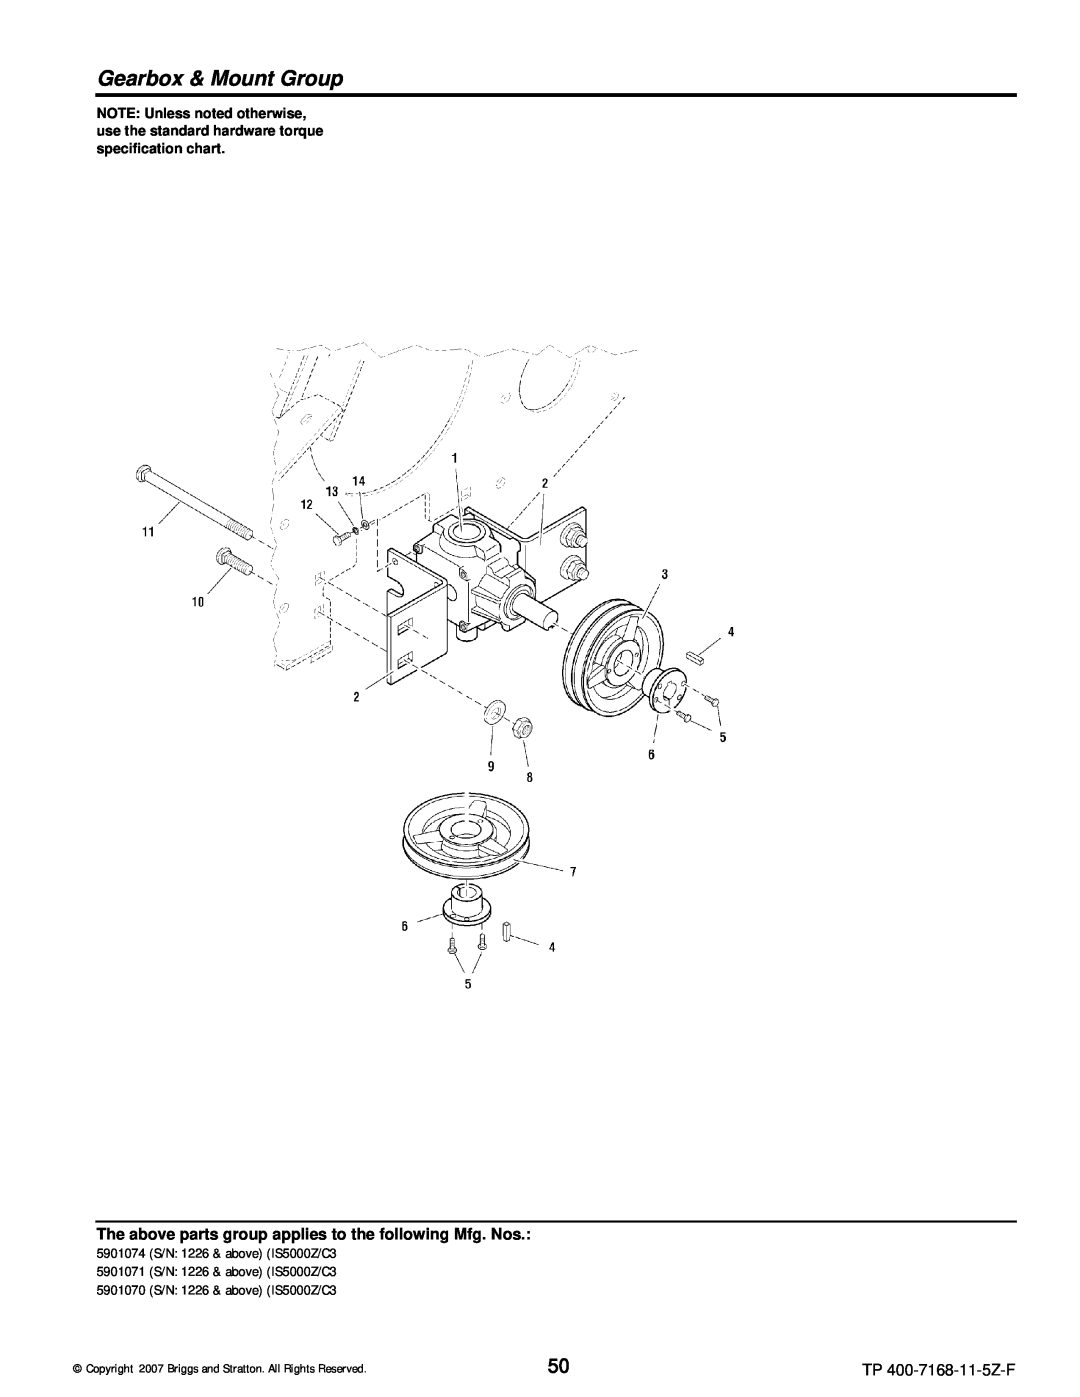 Briggs & Stratton manual Gearbox & Mount Group, 5901074 S/N 1226 & above IS5000Z/C3, 5901071 S/N 1226 & above IS5000Z/C3 